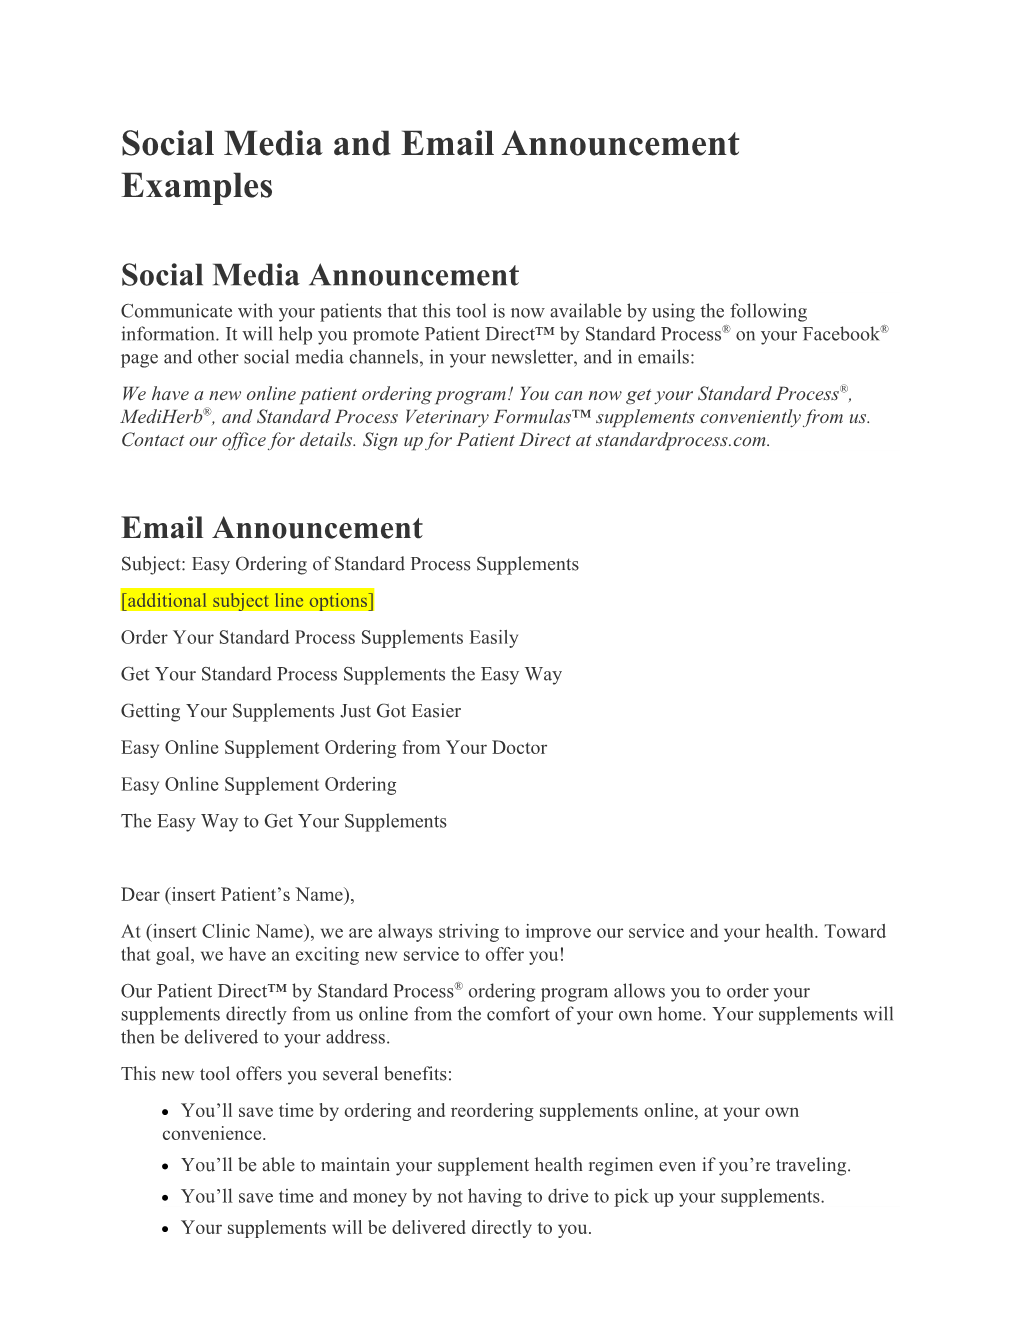 Social Media and Email Announcement Examples